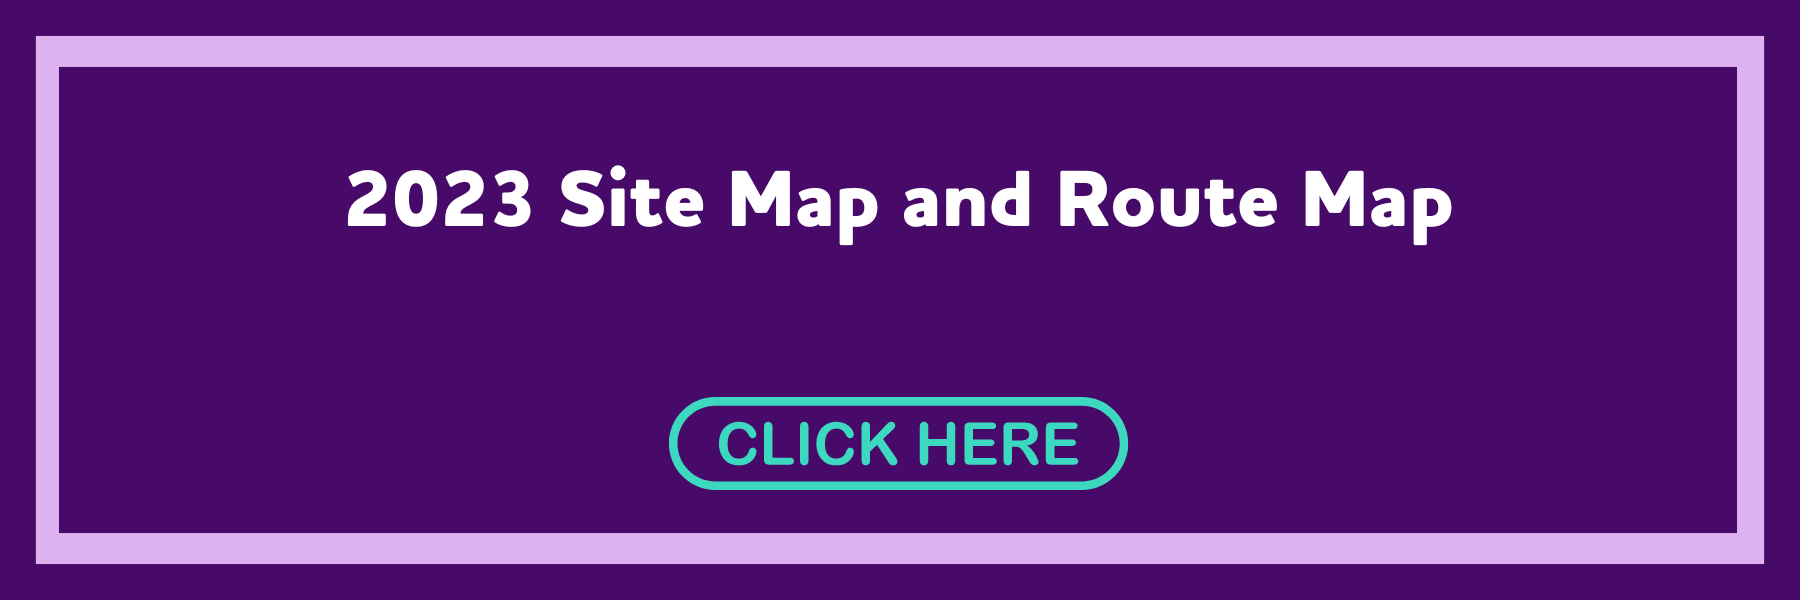 Site and Route Map Button